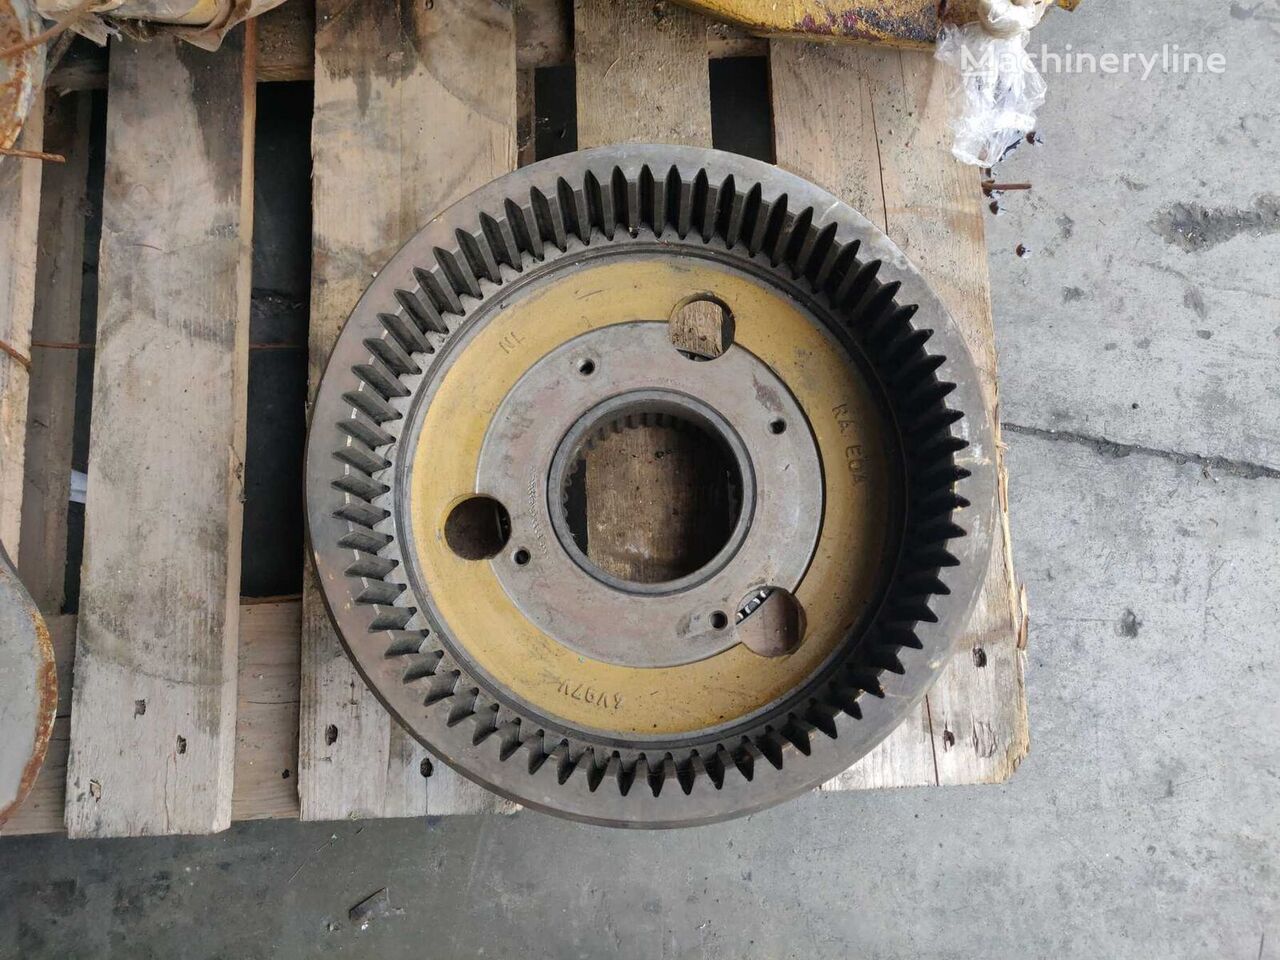 66 Teeth final drive gear ring complete with hub 4V0092 4V7545 for Caterpillar D300D 5MG324 bulldozer